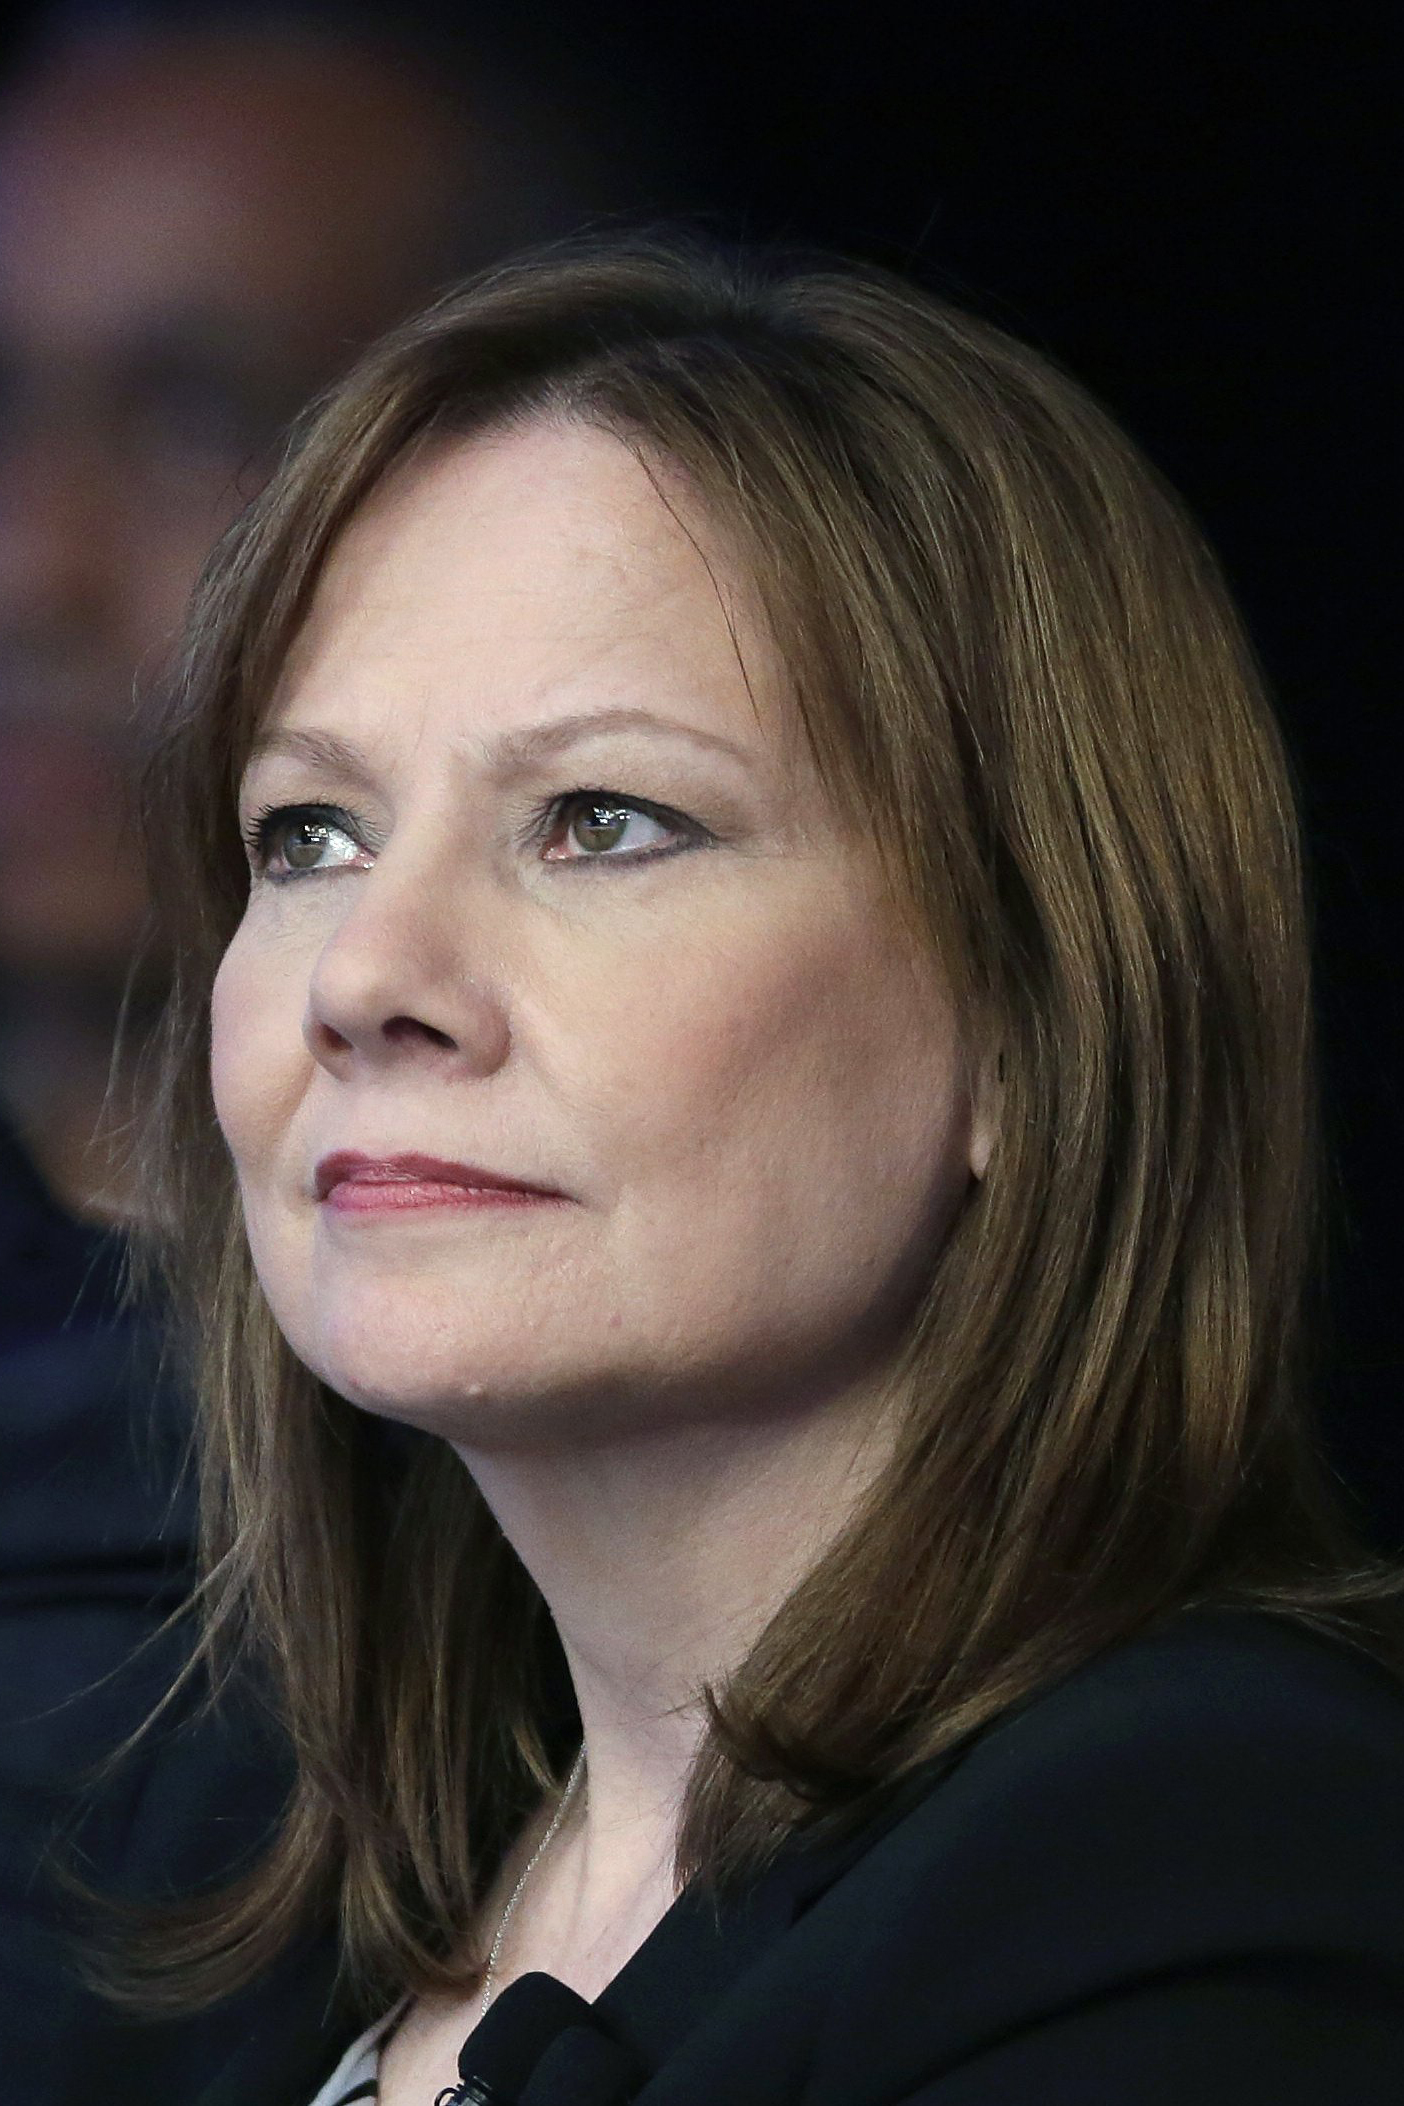 Mary Barra, CEO of General Motors watches the introduction of new Chevrolet cars at the New York International Auto Show, in New York City, April 15, 2014. (Mark Lennihan—AP)